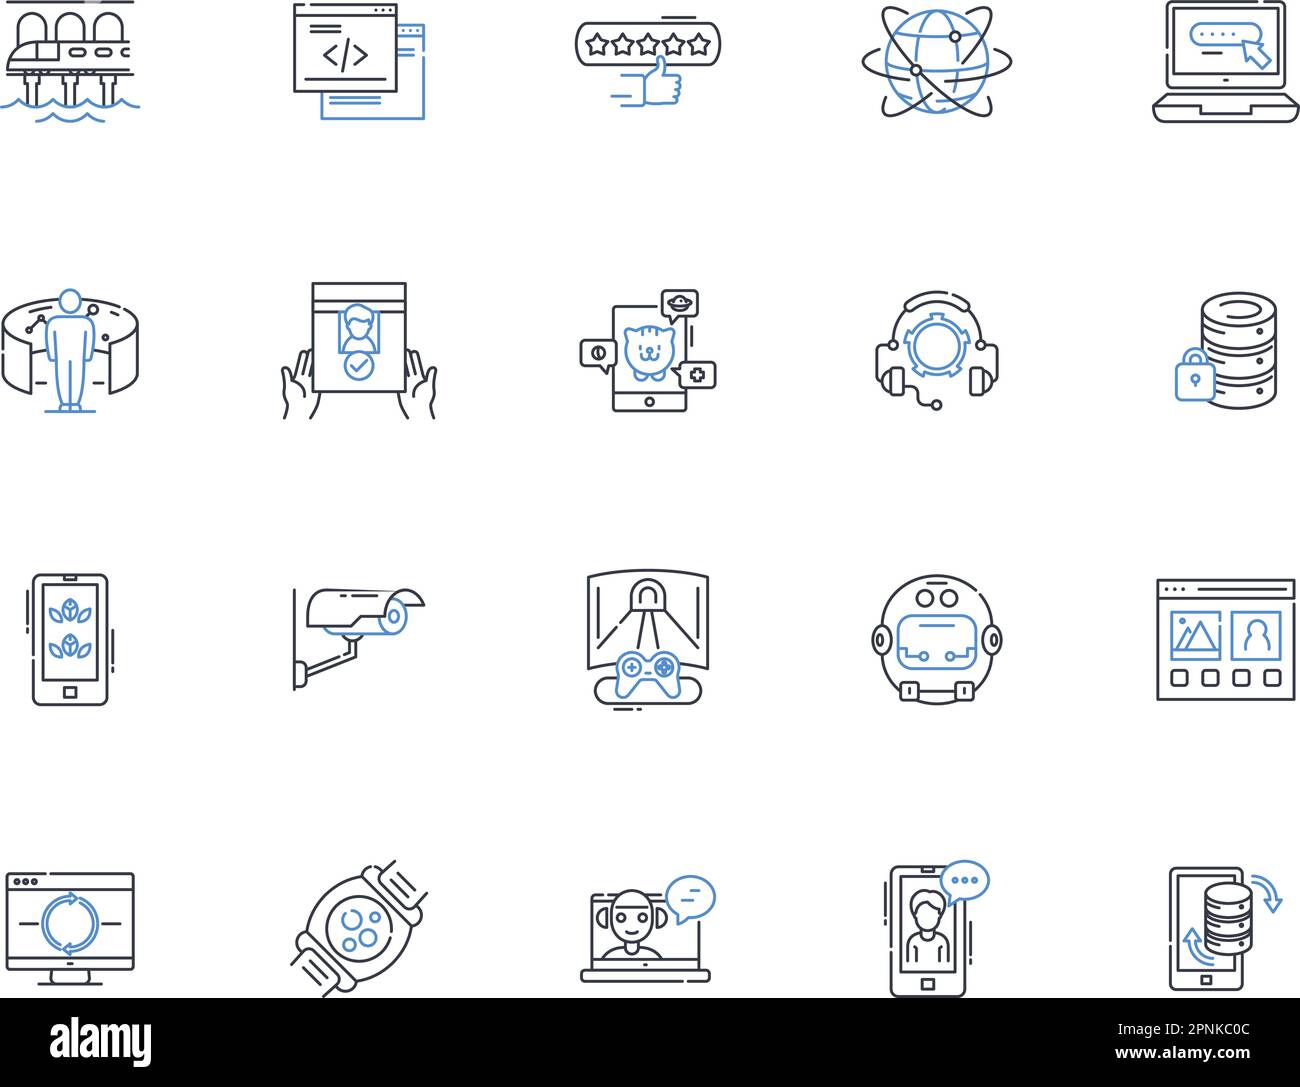 Appliances line icons collection. Refrigerator, Dishwasher, Oven, Microwave, Stove, Blender, Coffee maker vector and linear illustration. Toaster,Food Stock Vector